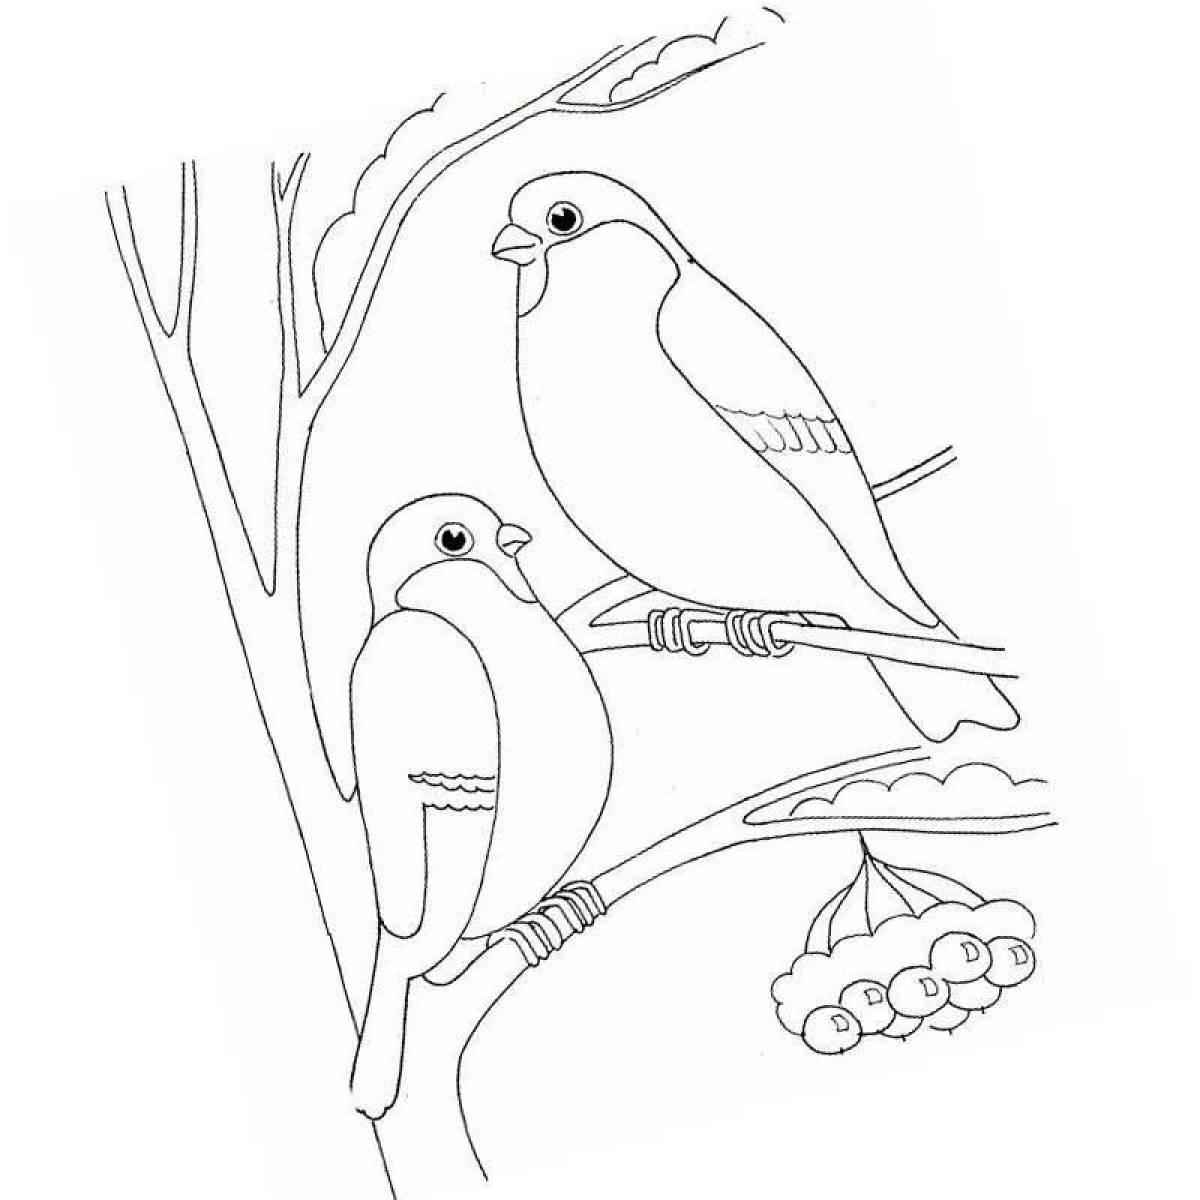 Animated coloring pages of wintering birds for children 6-7 years old